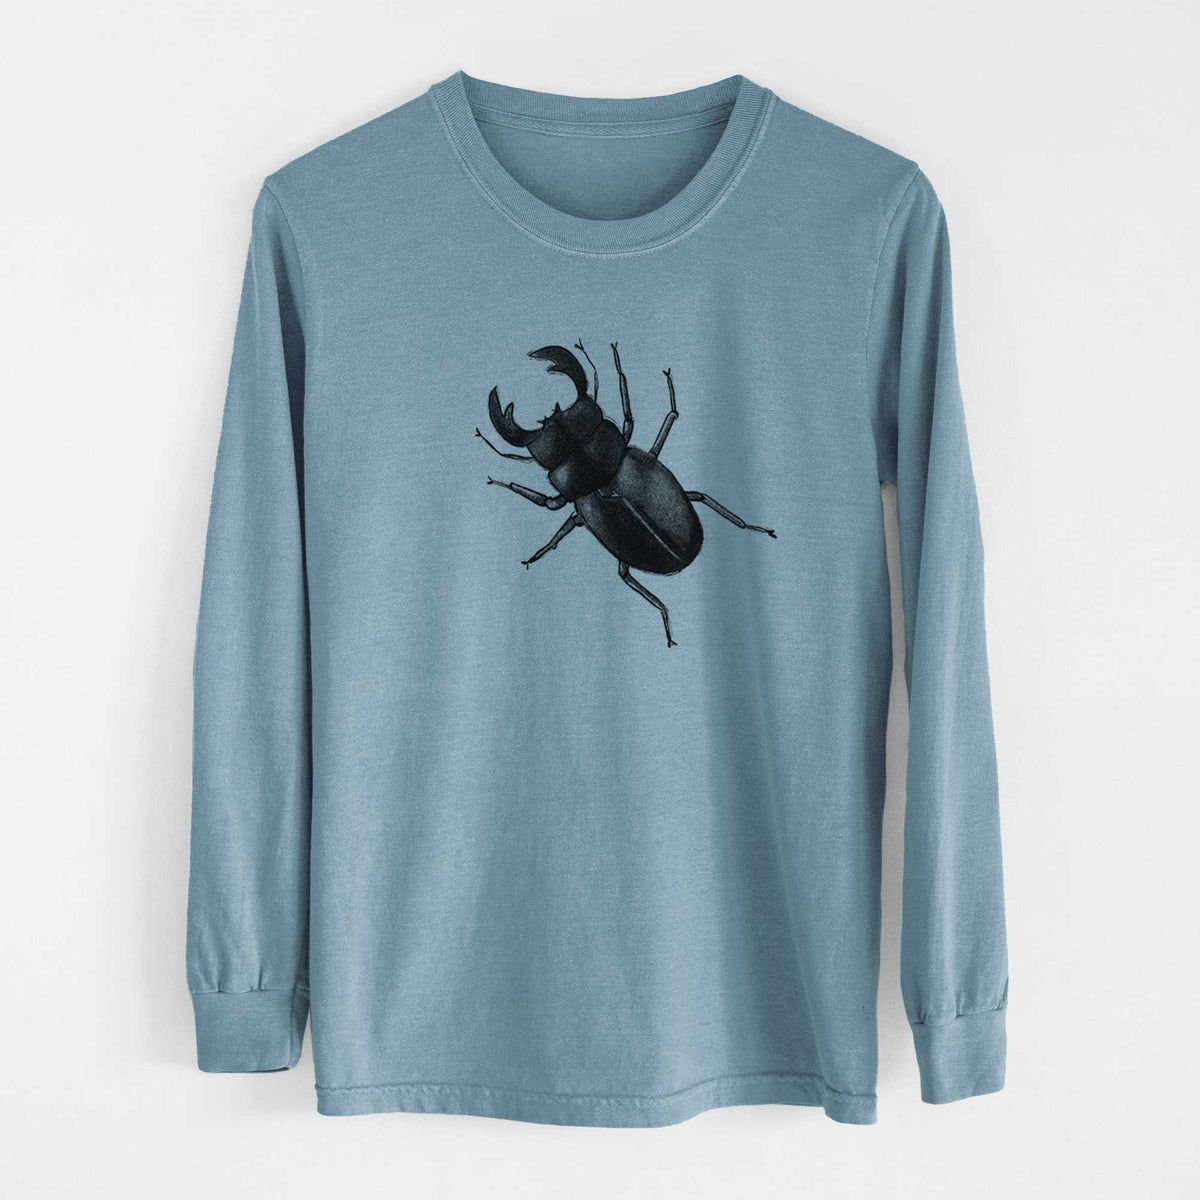 Dorcus titanus - Giant Stag Beetle - Heavyweight 100% Cotton Long Sleeve